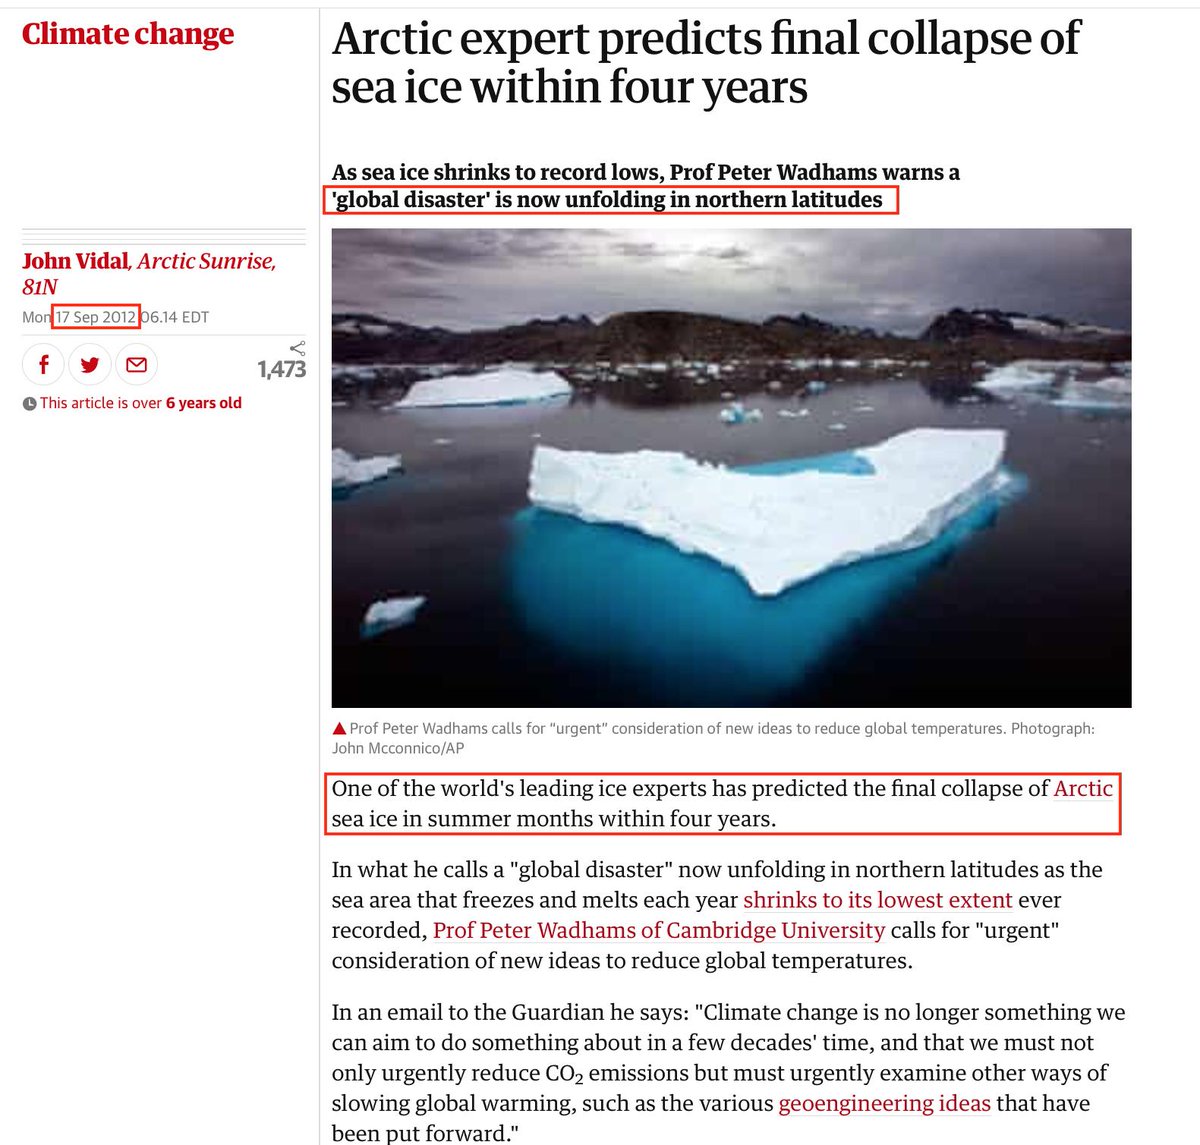 62. Then, in 2012 climate science gave us 4 more years before the sea ice would be gone in the summer. https://www.theguardian.com/environment/2012/sep/17/arctic-collapse-sea-ice